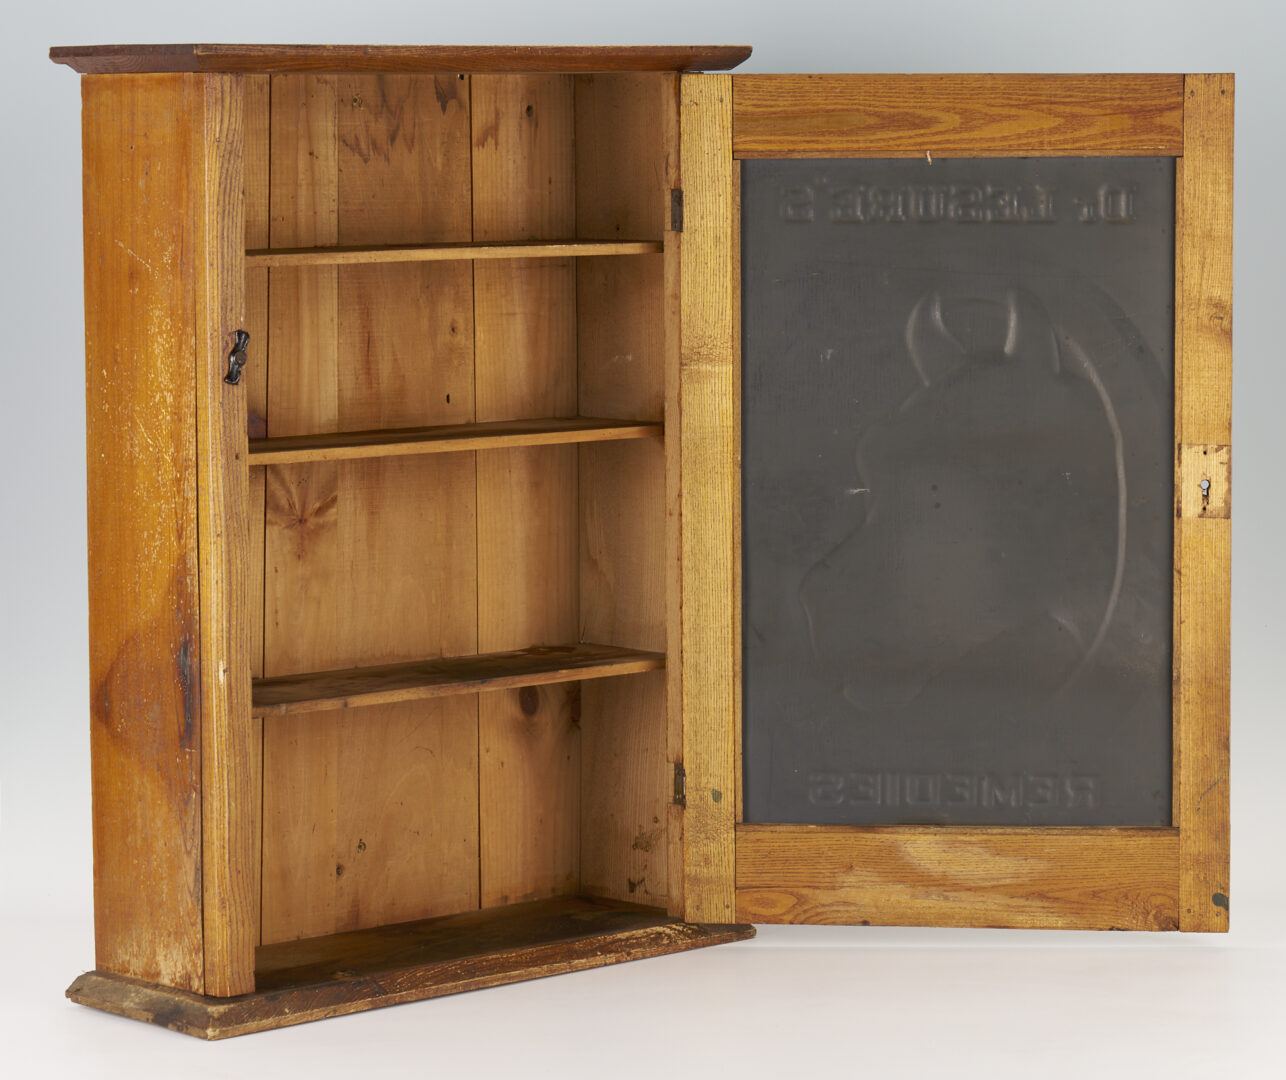 Lot 170: Dr. Lesure's Famous Remedies Veterinary Advertising Cabinet